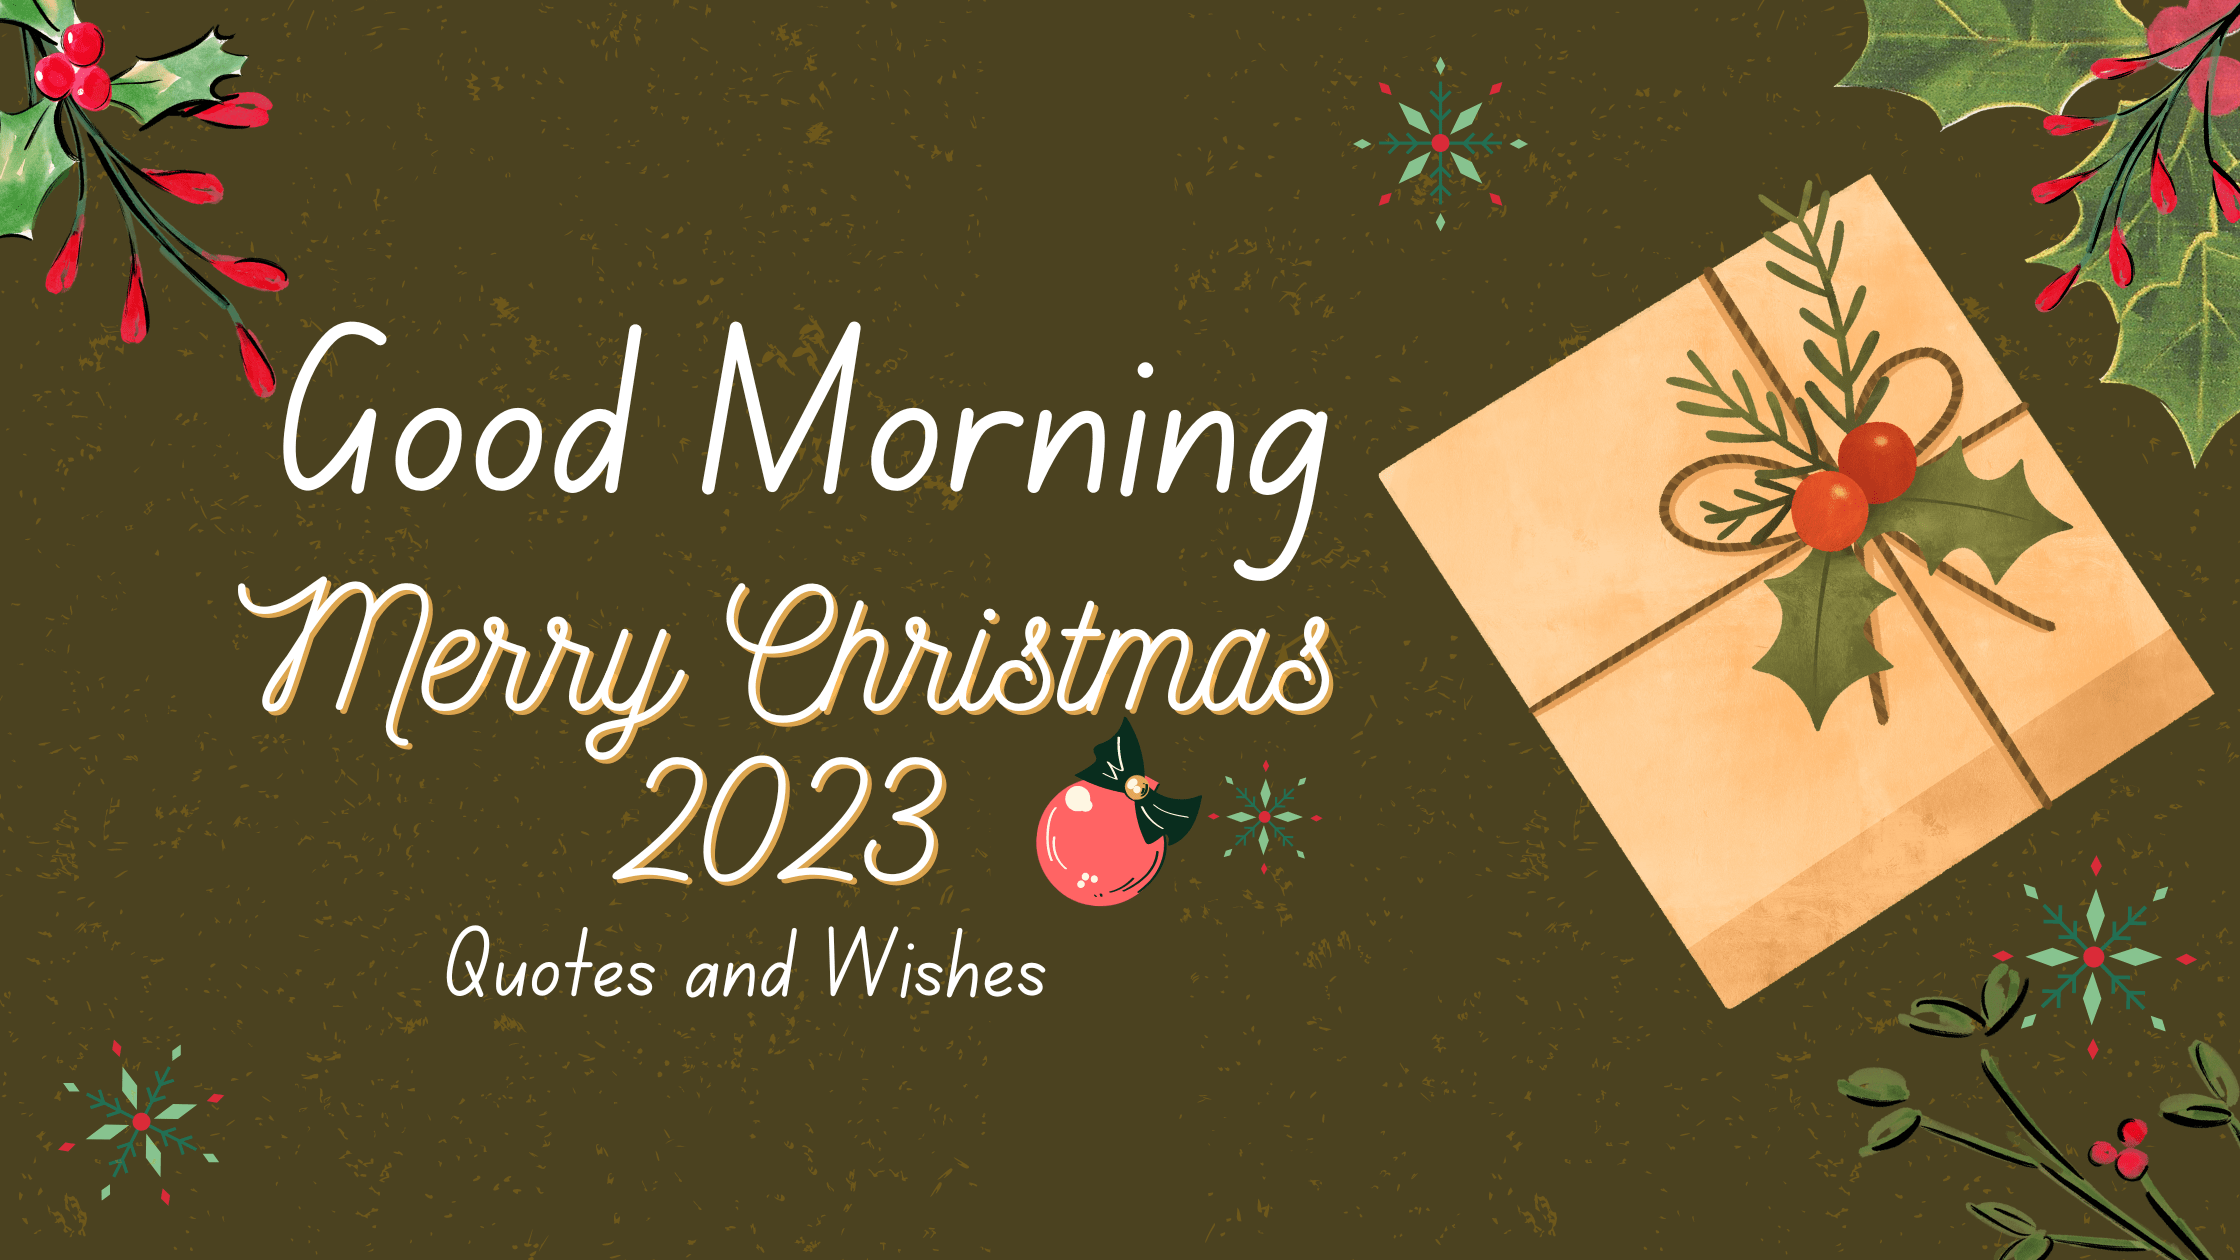 Good Morning Merry Christmas 2023 Quotes and Wishes